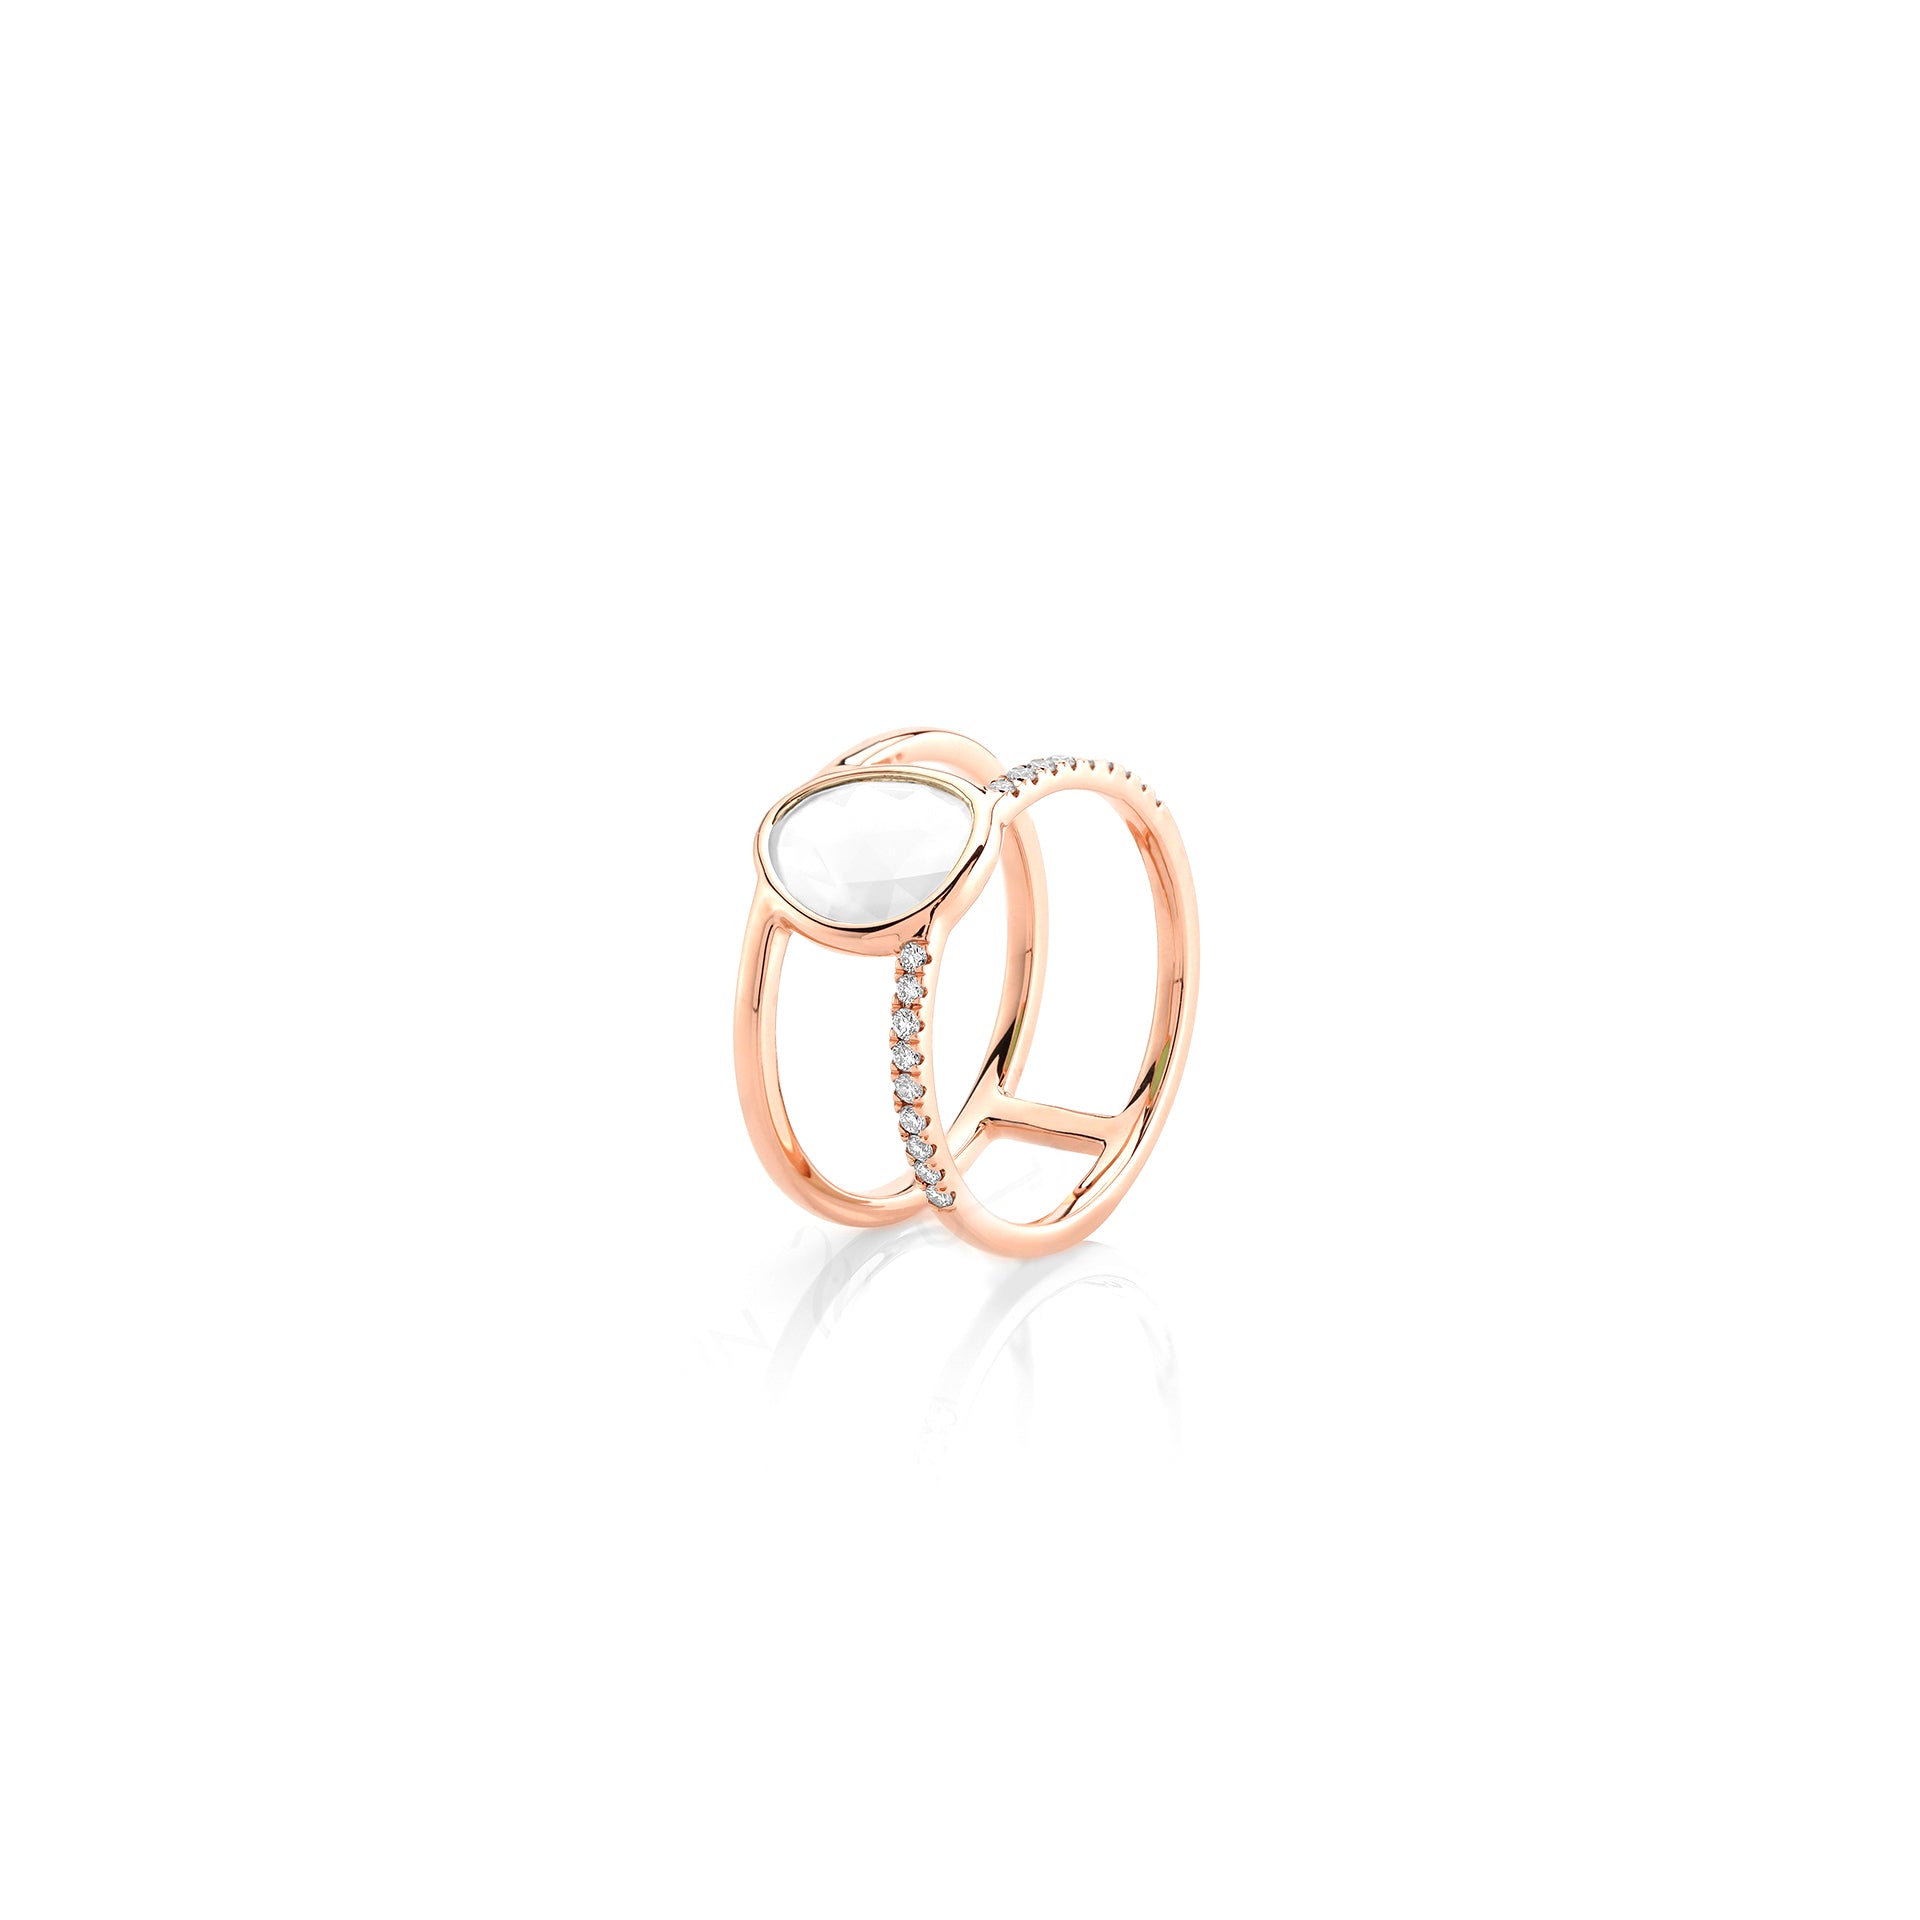 Simply Nina ring in 18k rose gold with Mother of Pearl stone and diamonds